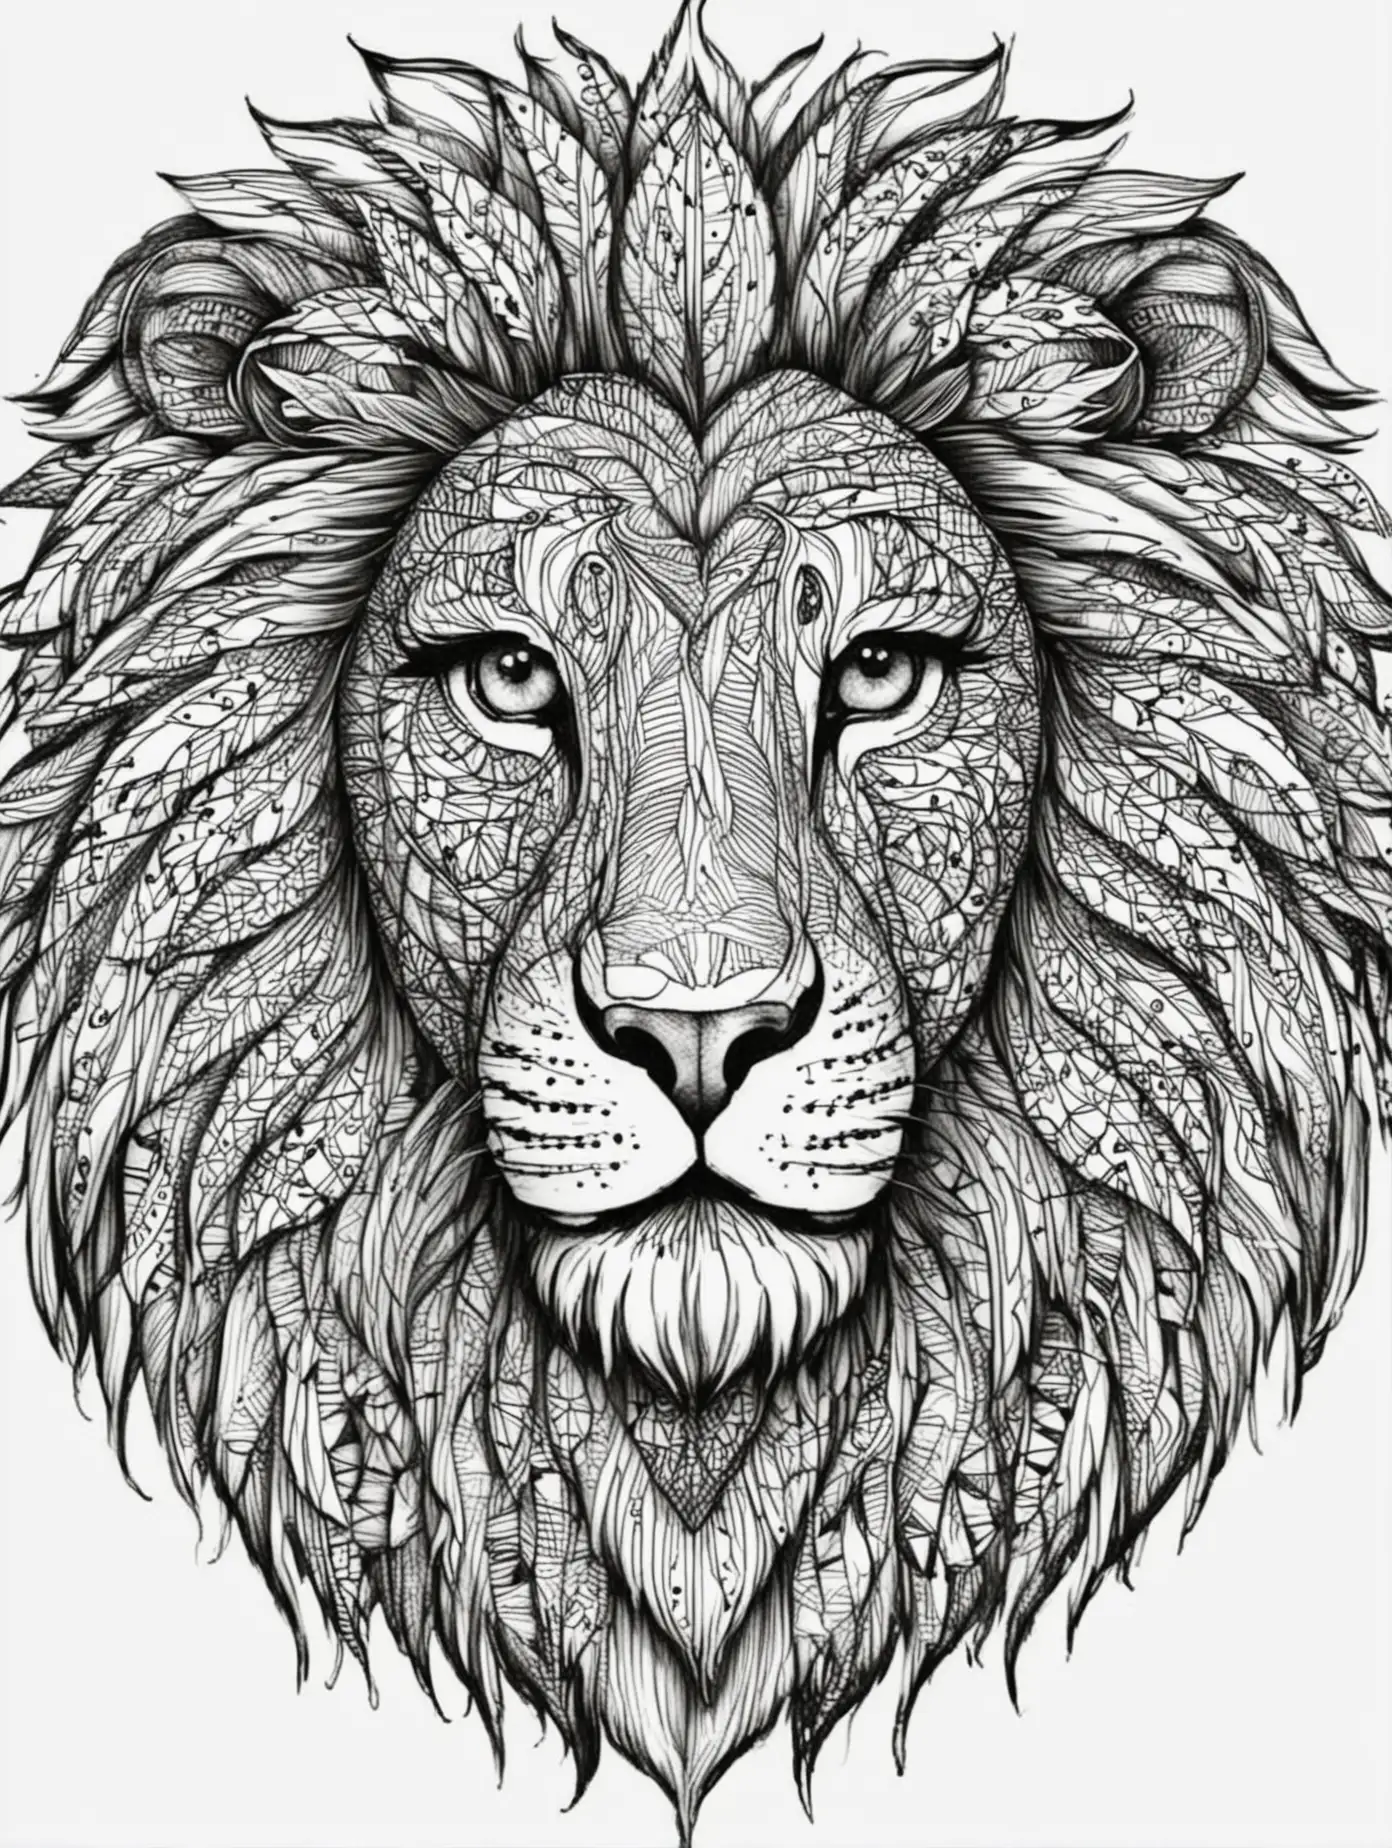 Lion Head Illustration in Zentangle Style Intricate Black and White Design